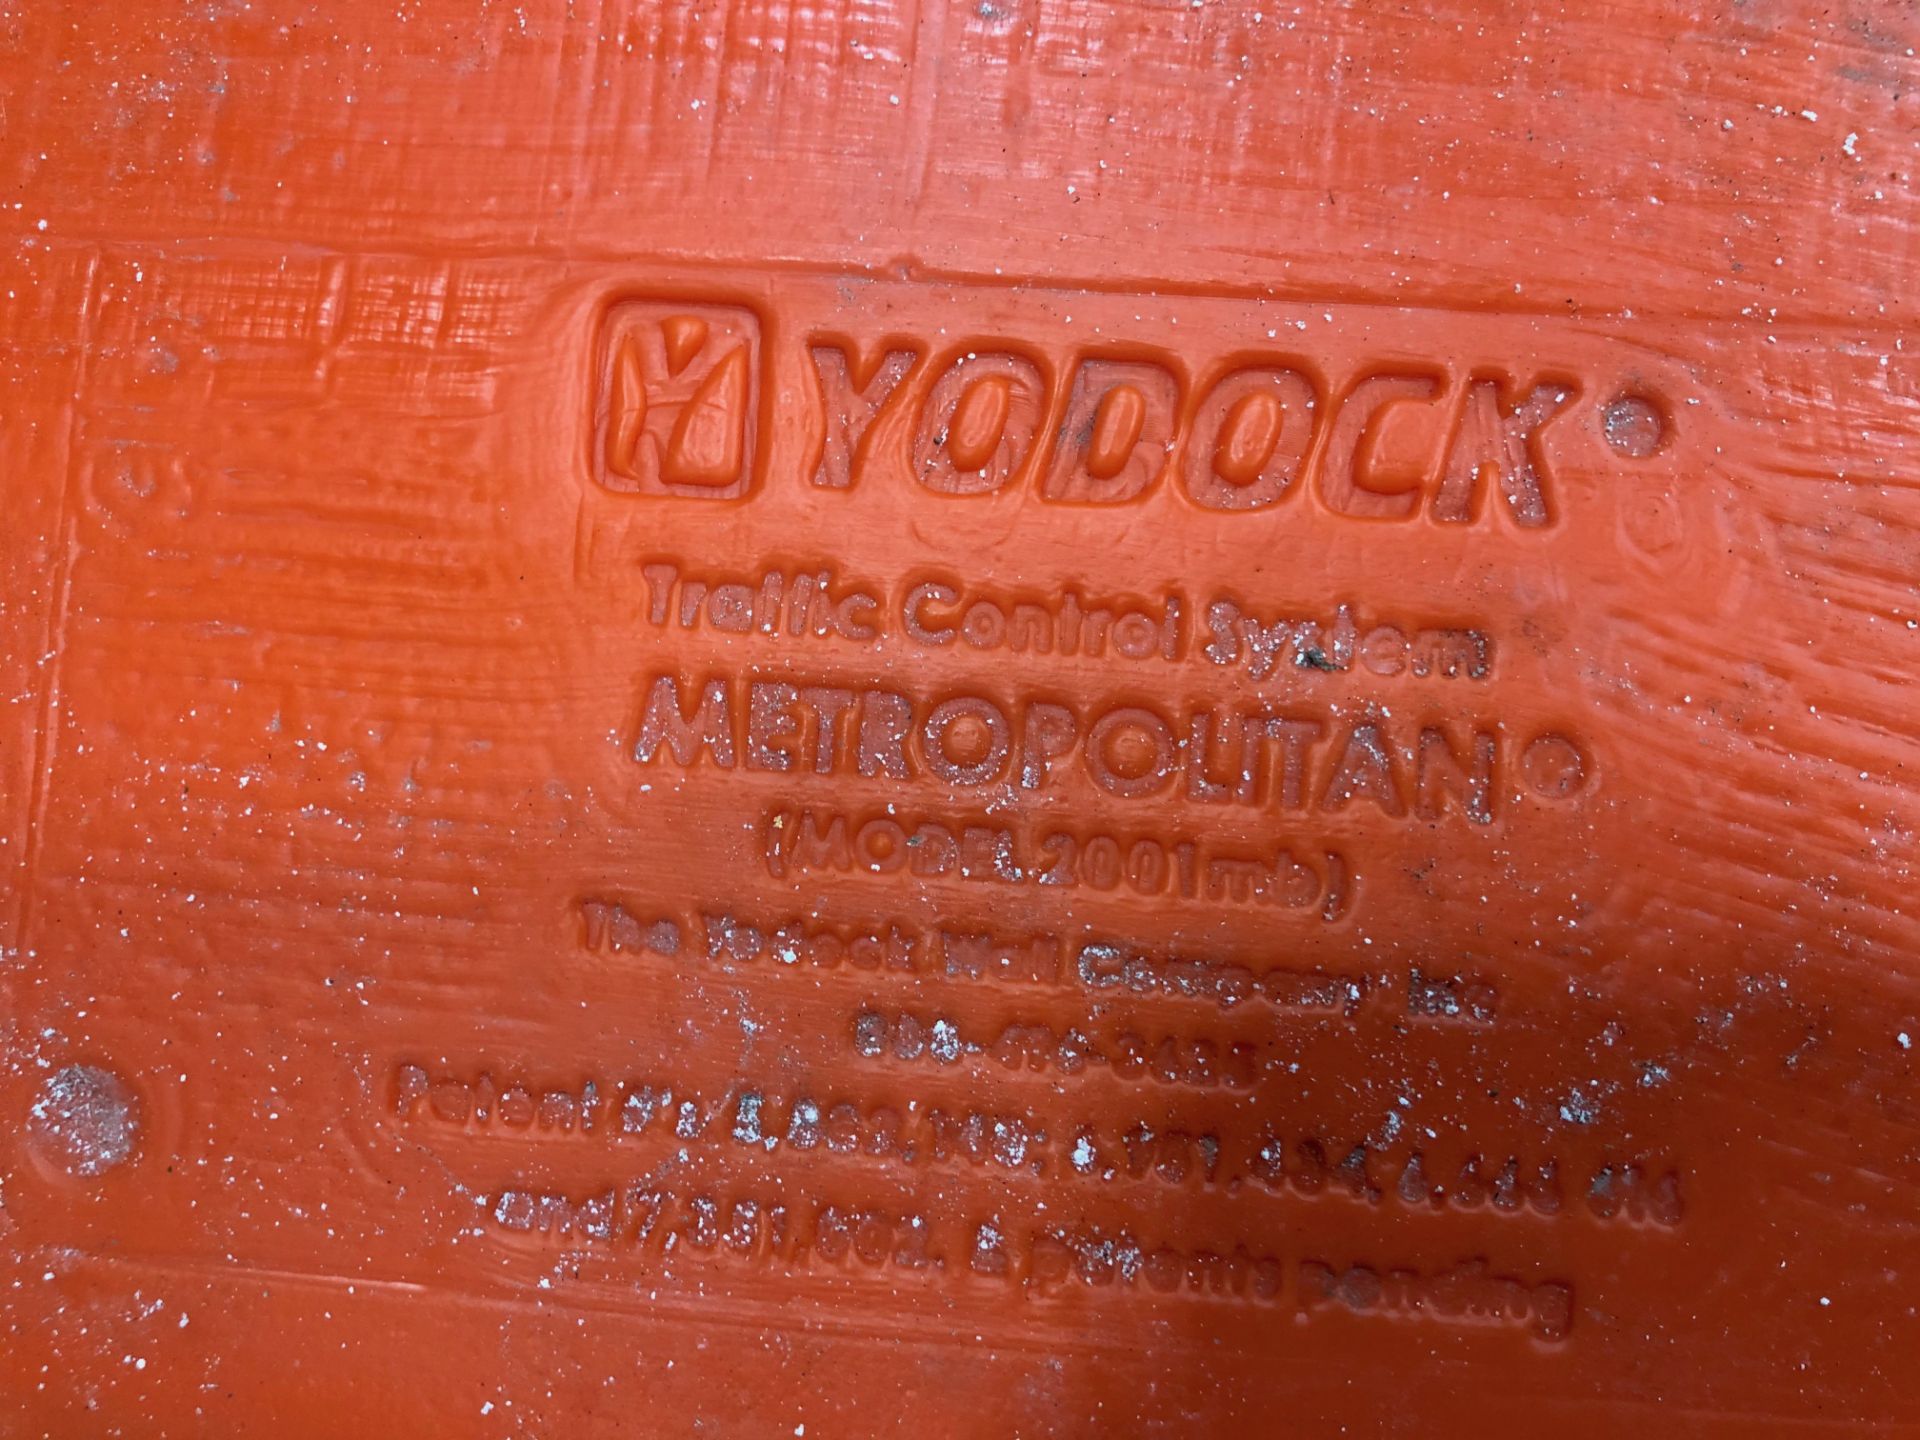 (3) Yodock Portable Orange Construction Barriers - Image 4 of 7